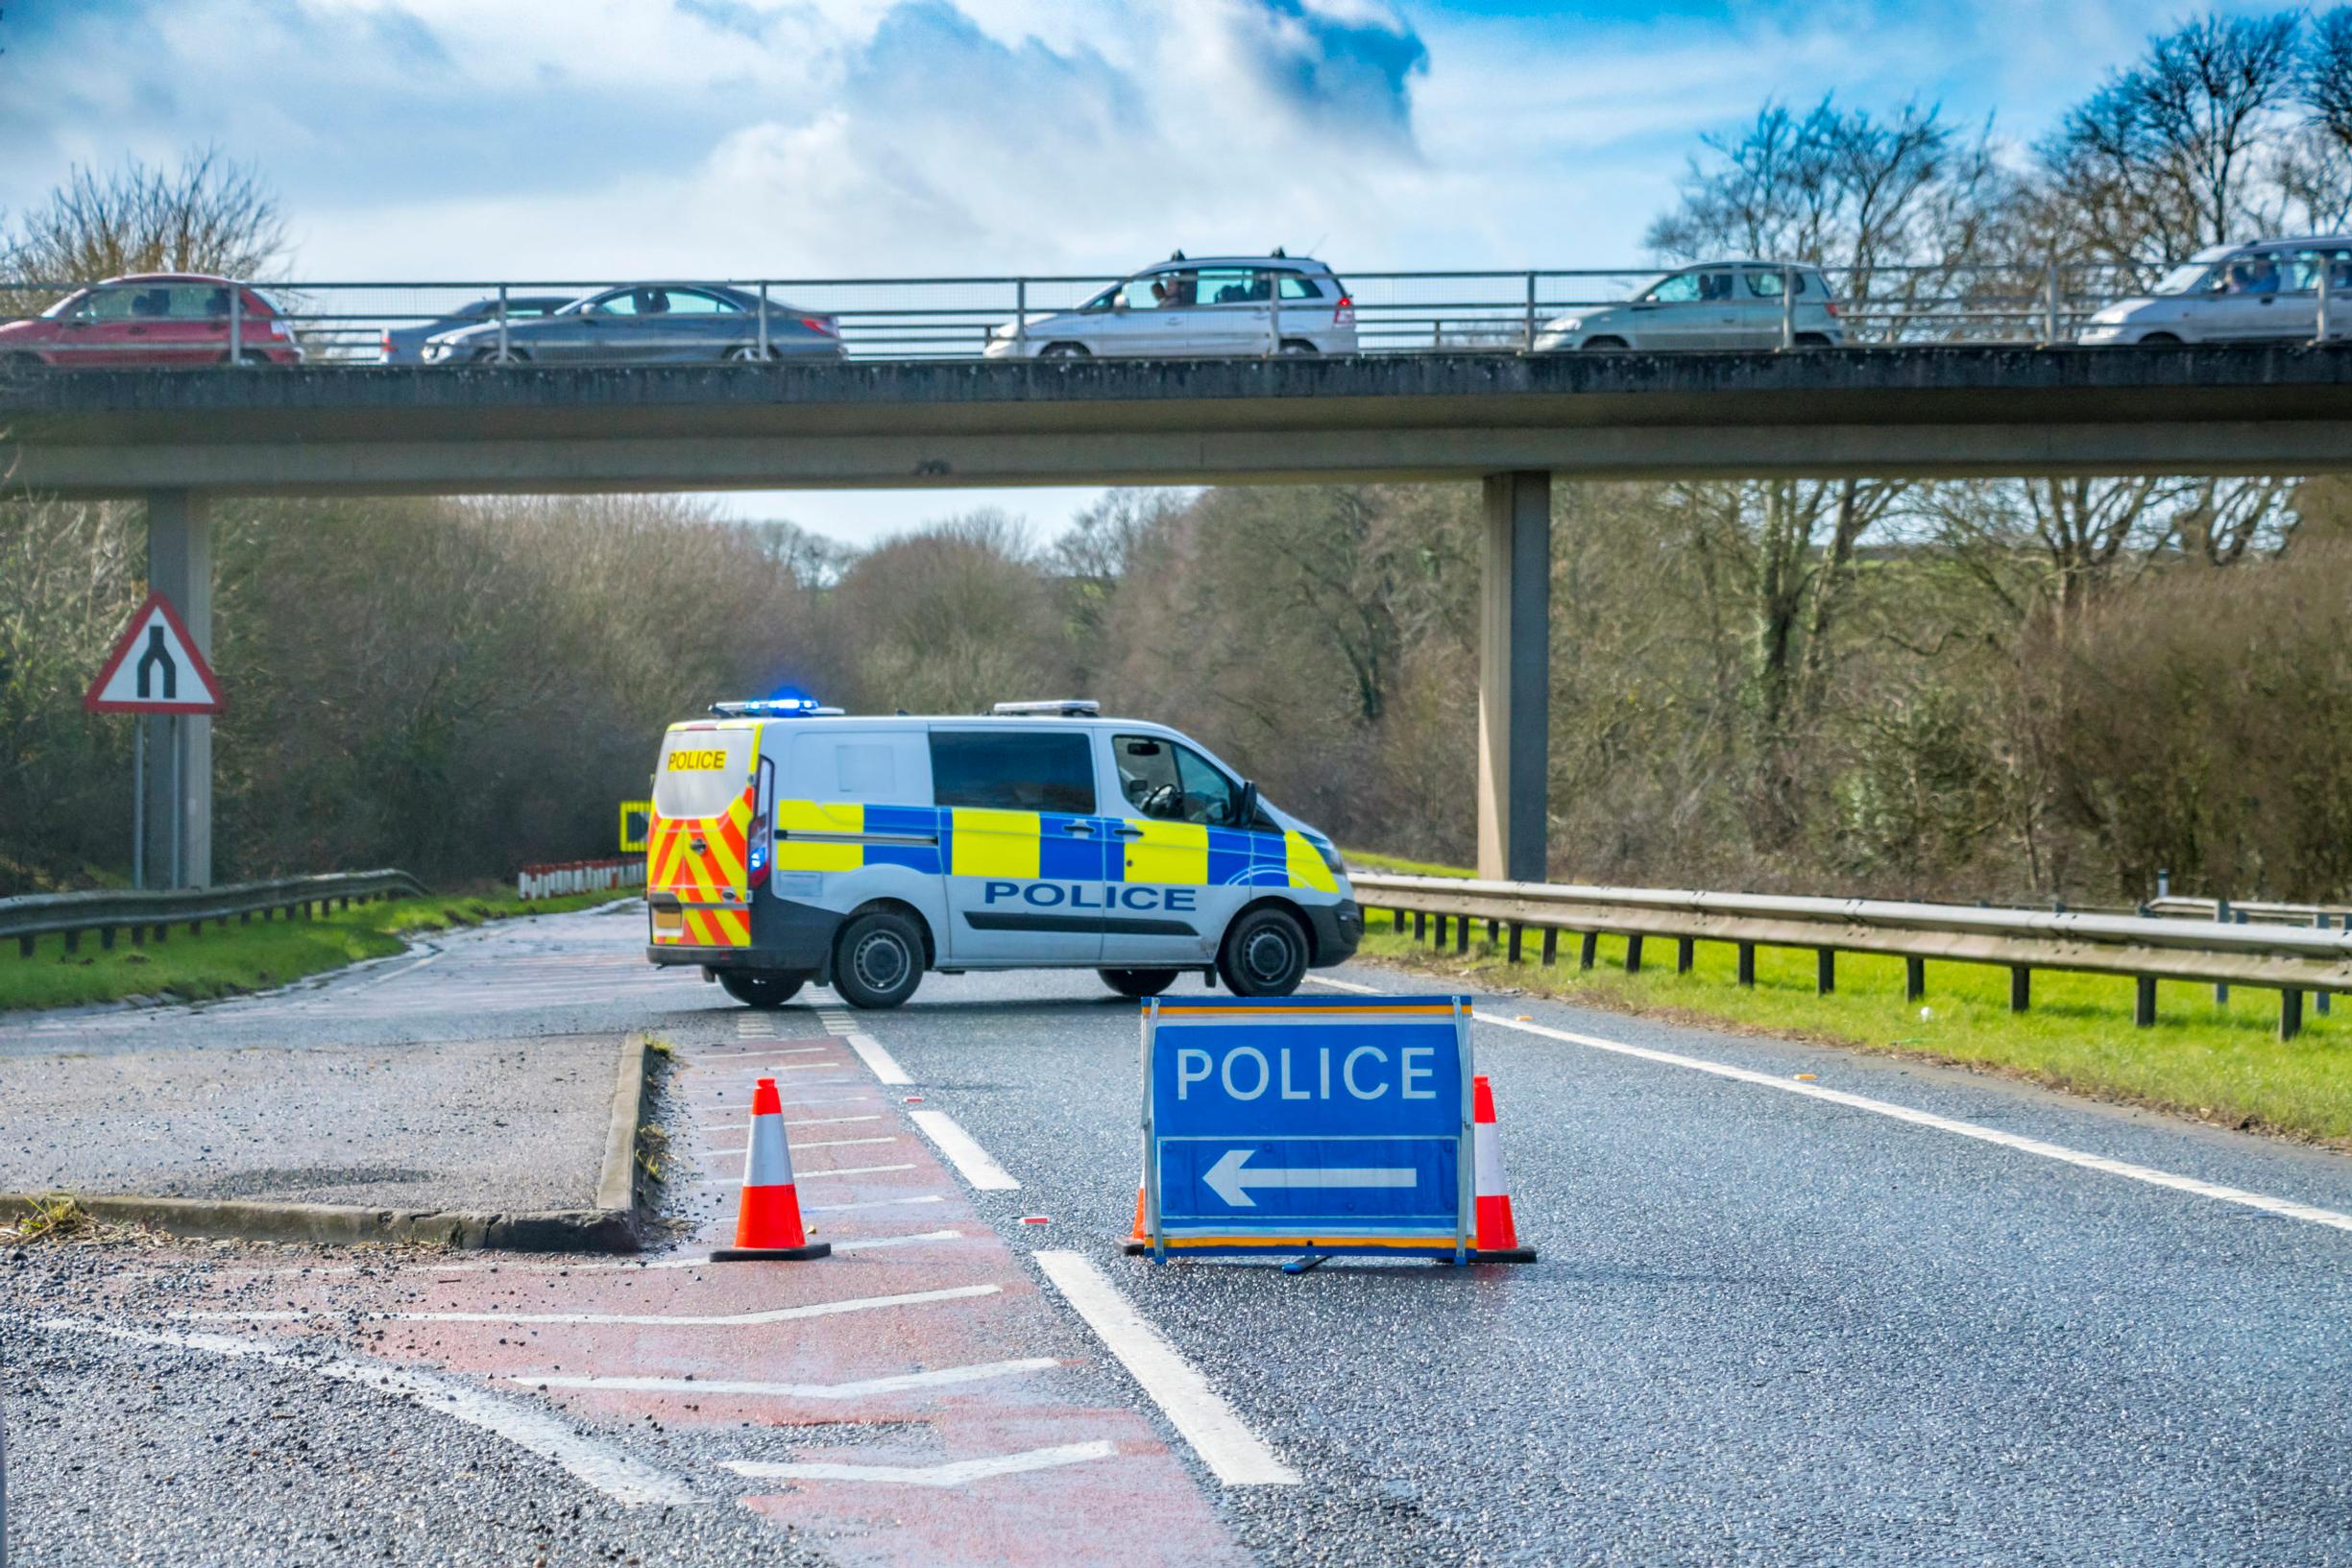 An independent Road Collision Investigation Branch (RCIB) should have the powers and resources to investigate major incidents, says the RAC Foundation report